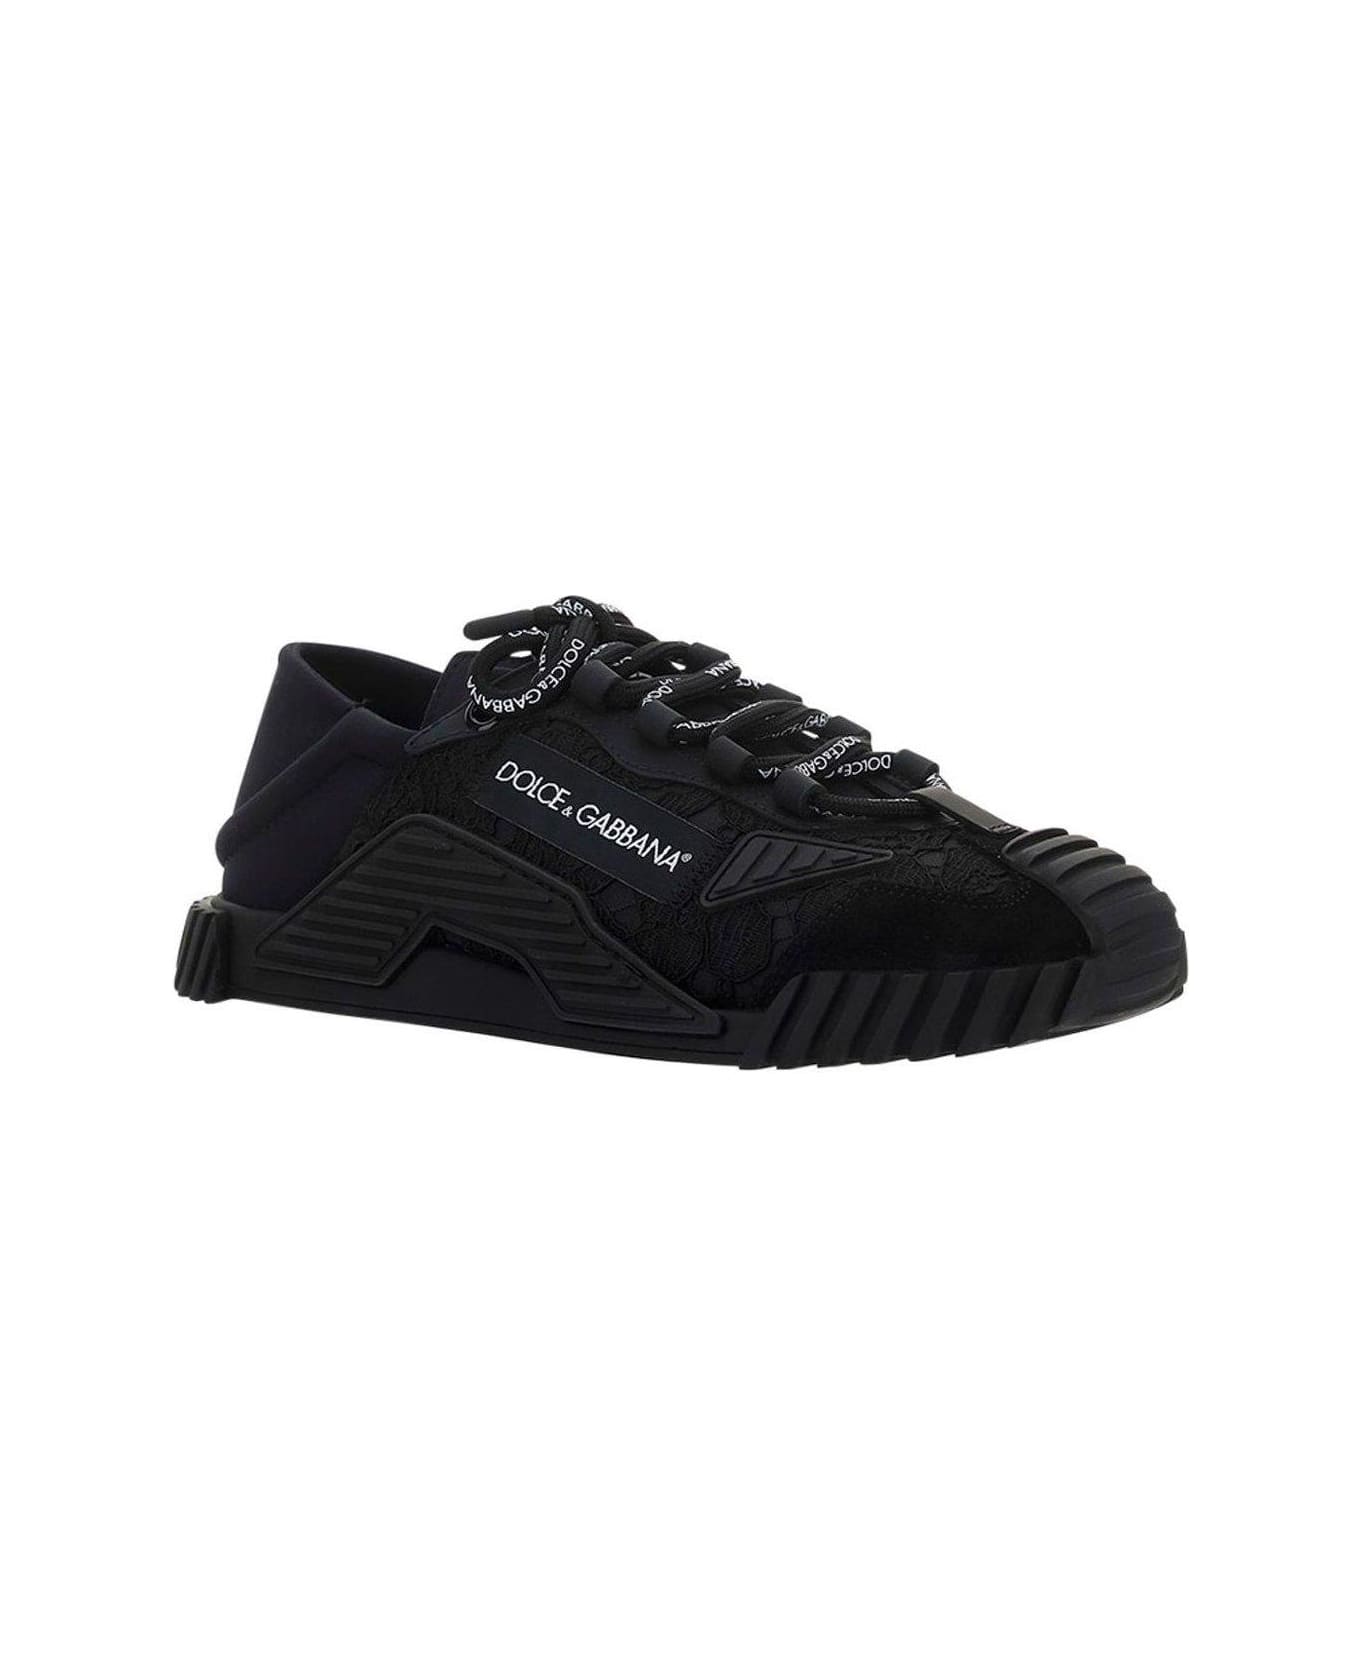 Dolce & Gabbana Ns1 Lace-up Sneakers - Nero/nero